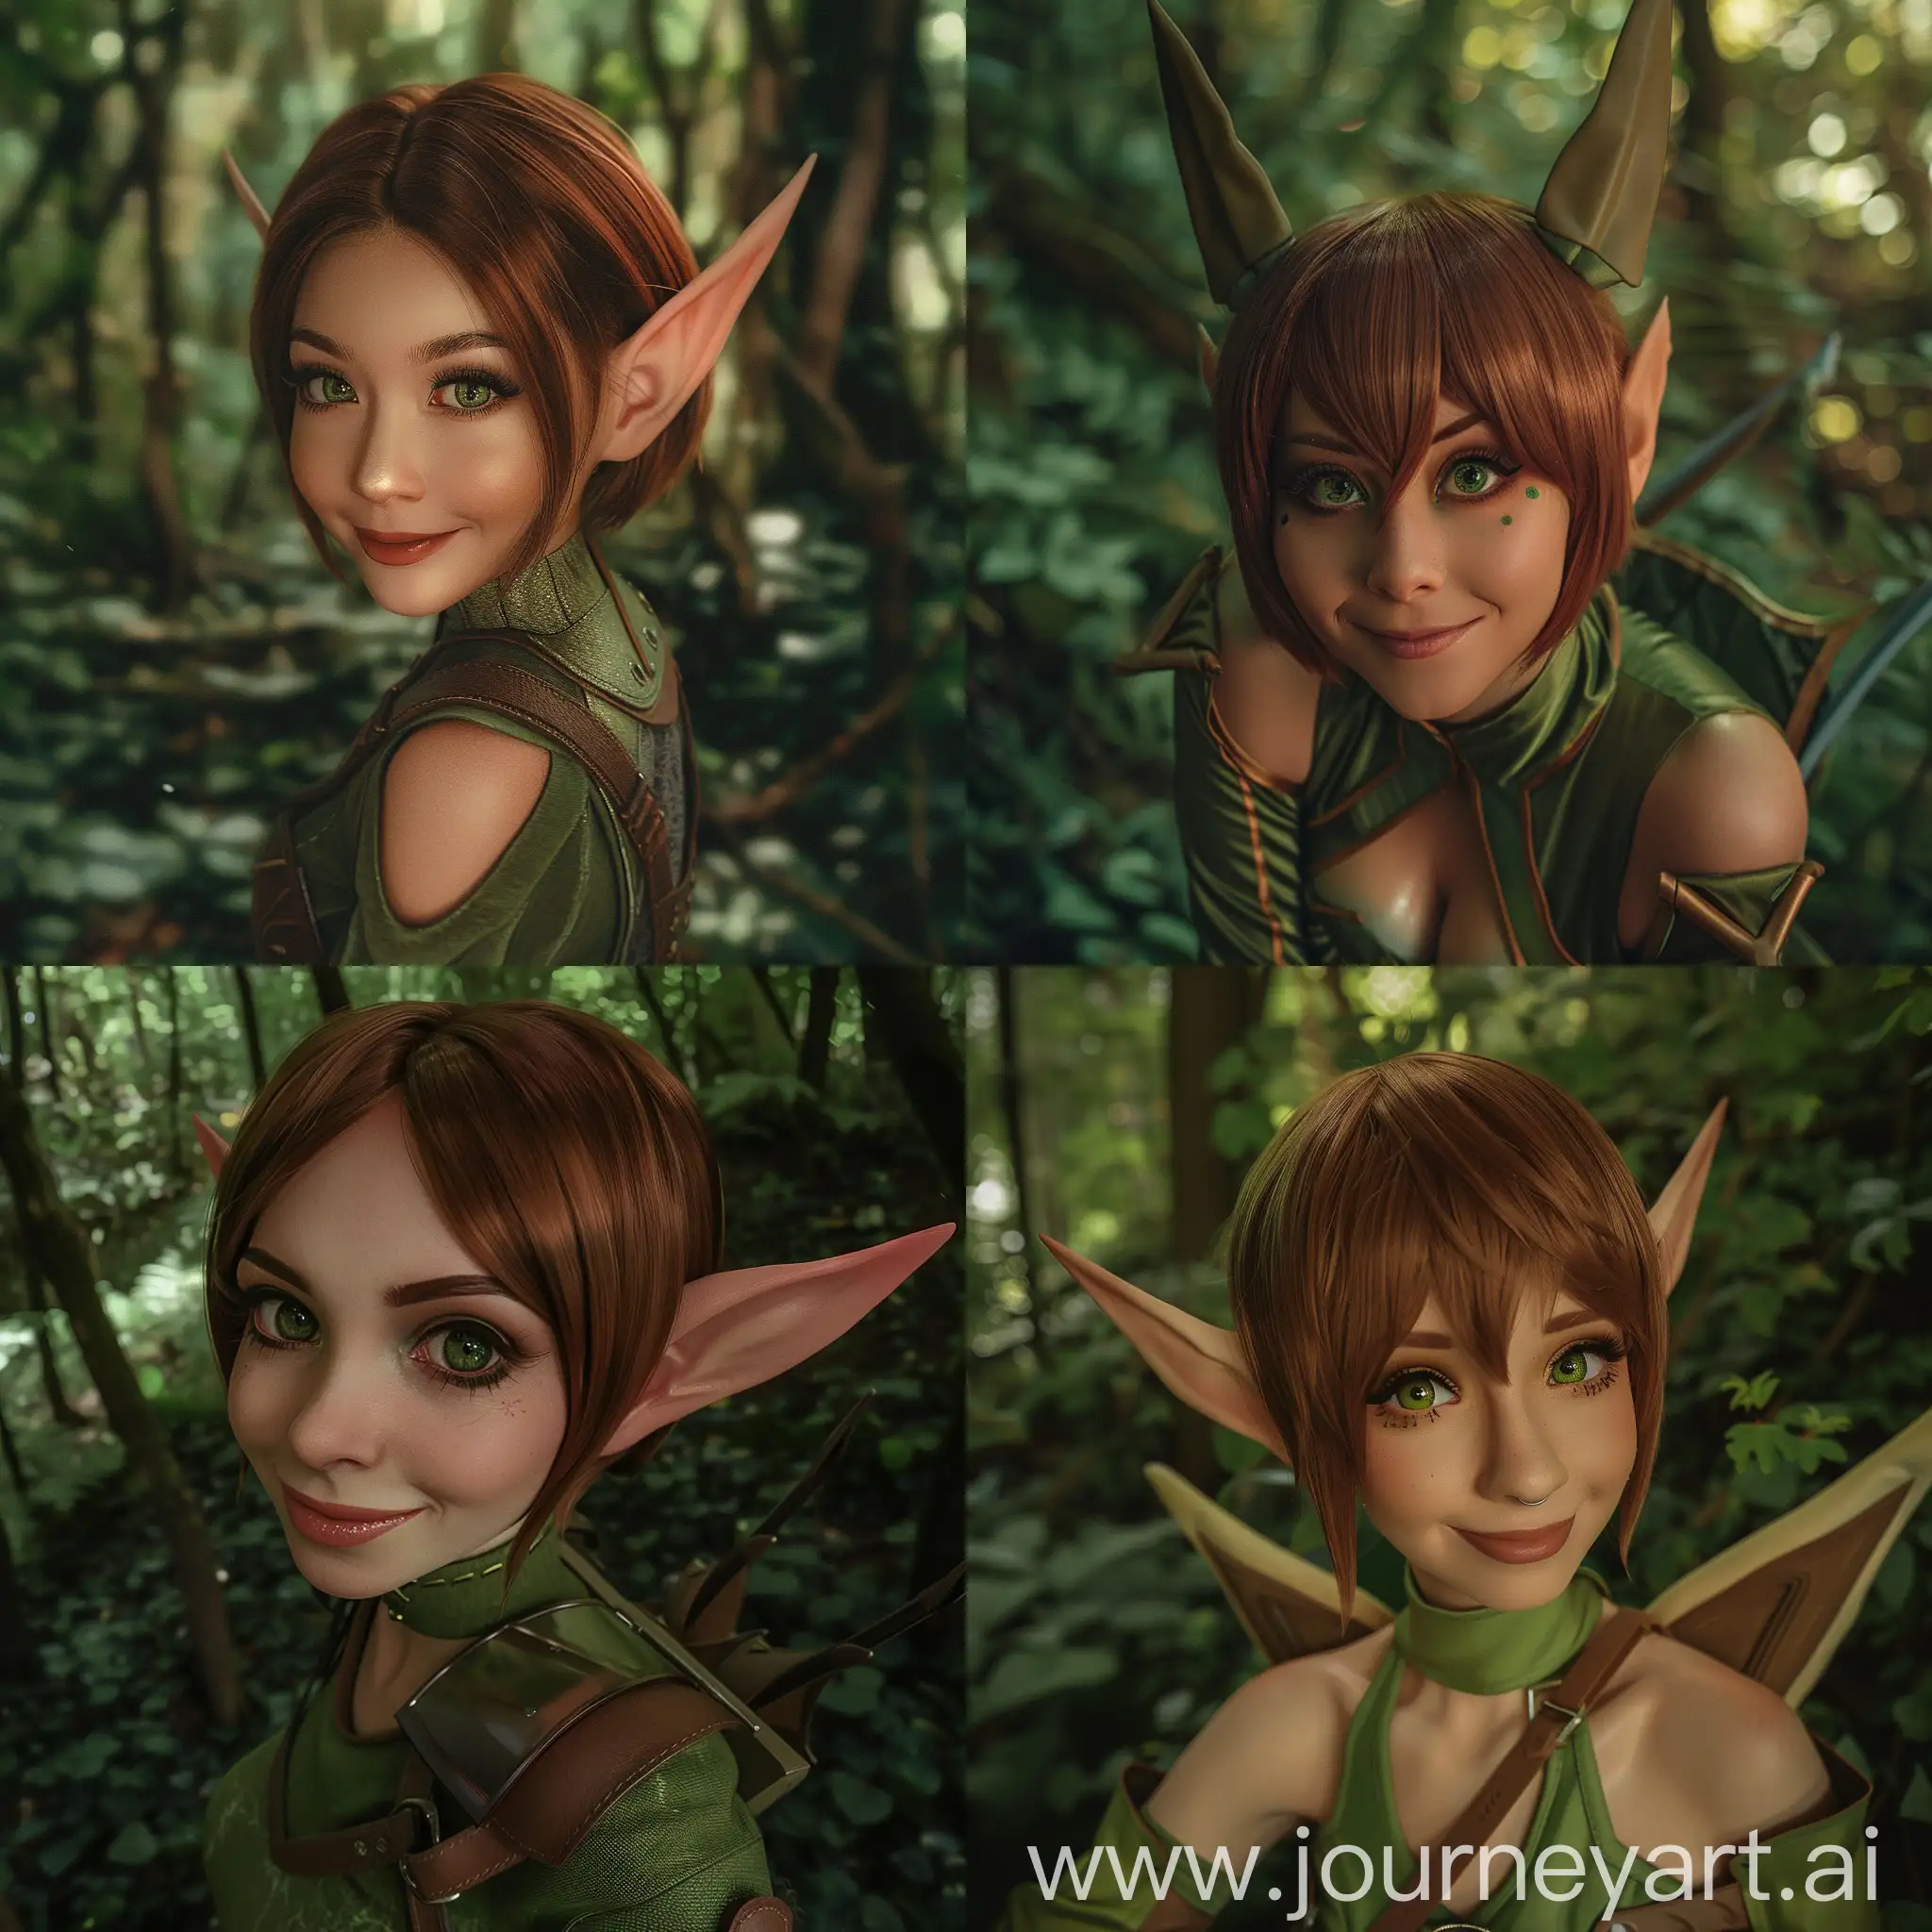 a photo of a cute elf with brown skin and short straight auburn hair plus tall pointed ears. Her eyes are large and green. She wears lady green adventuring gear and poses with a sweet smile. The background is a dense forest. Dramatic lighting.